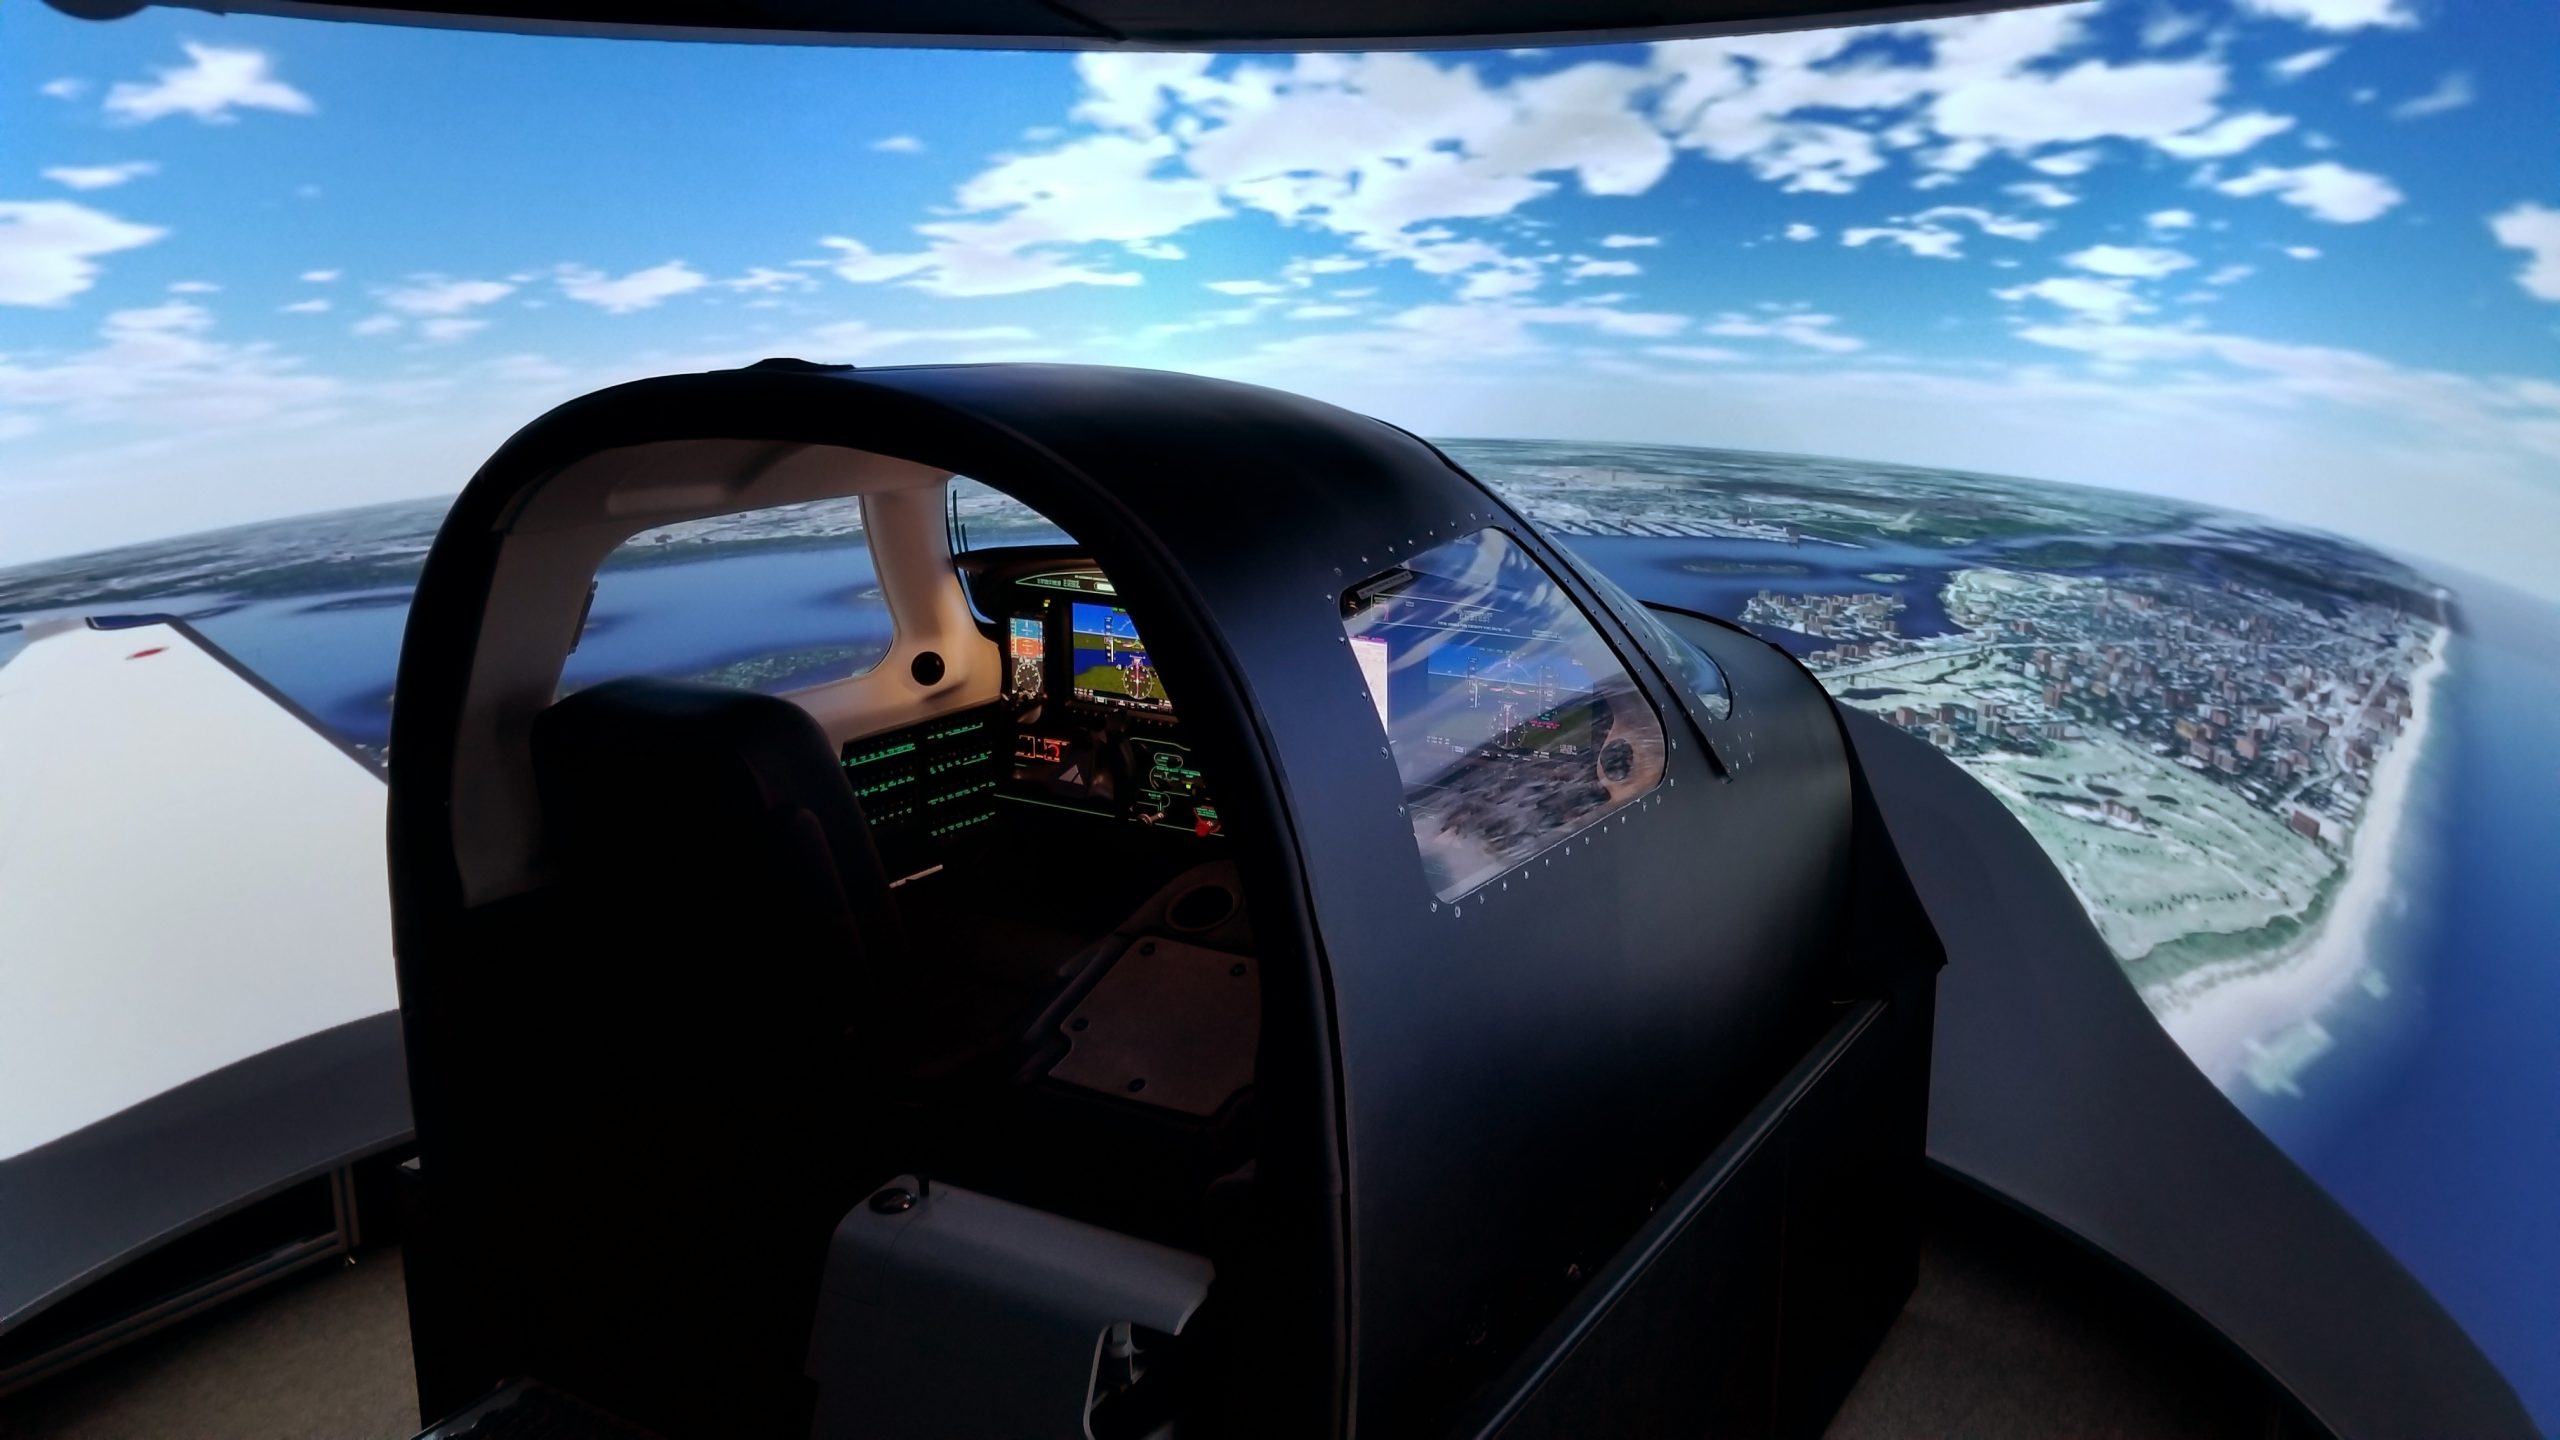 How much does a Frasca simulator cost? - Frasca Flight Simulation